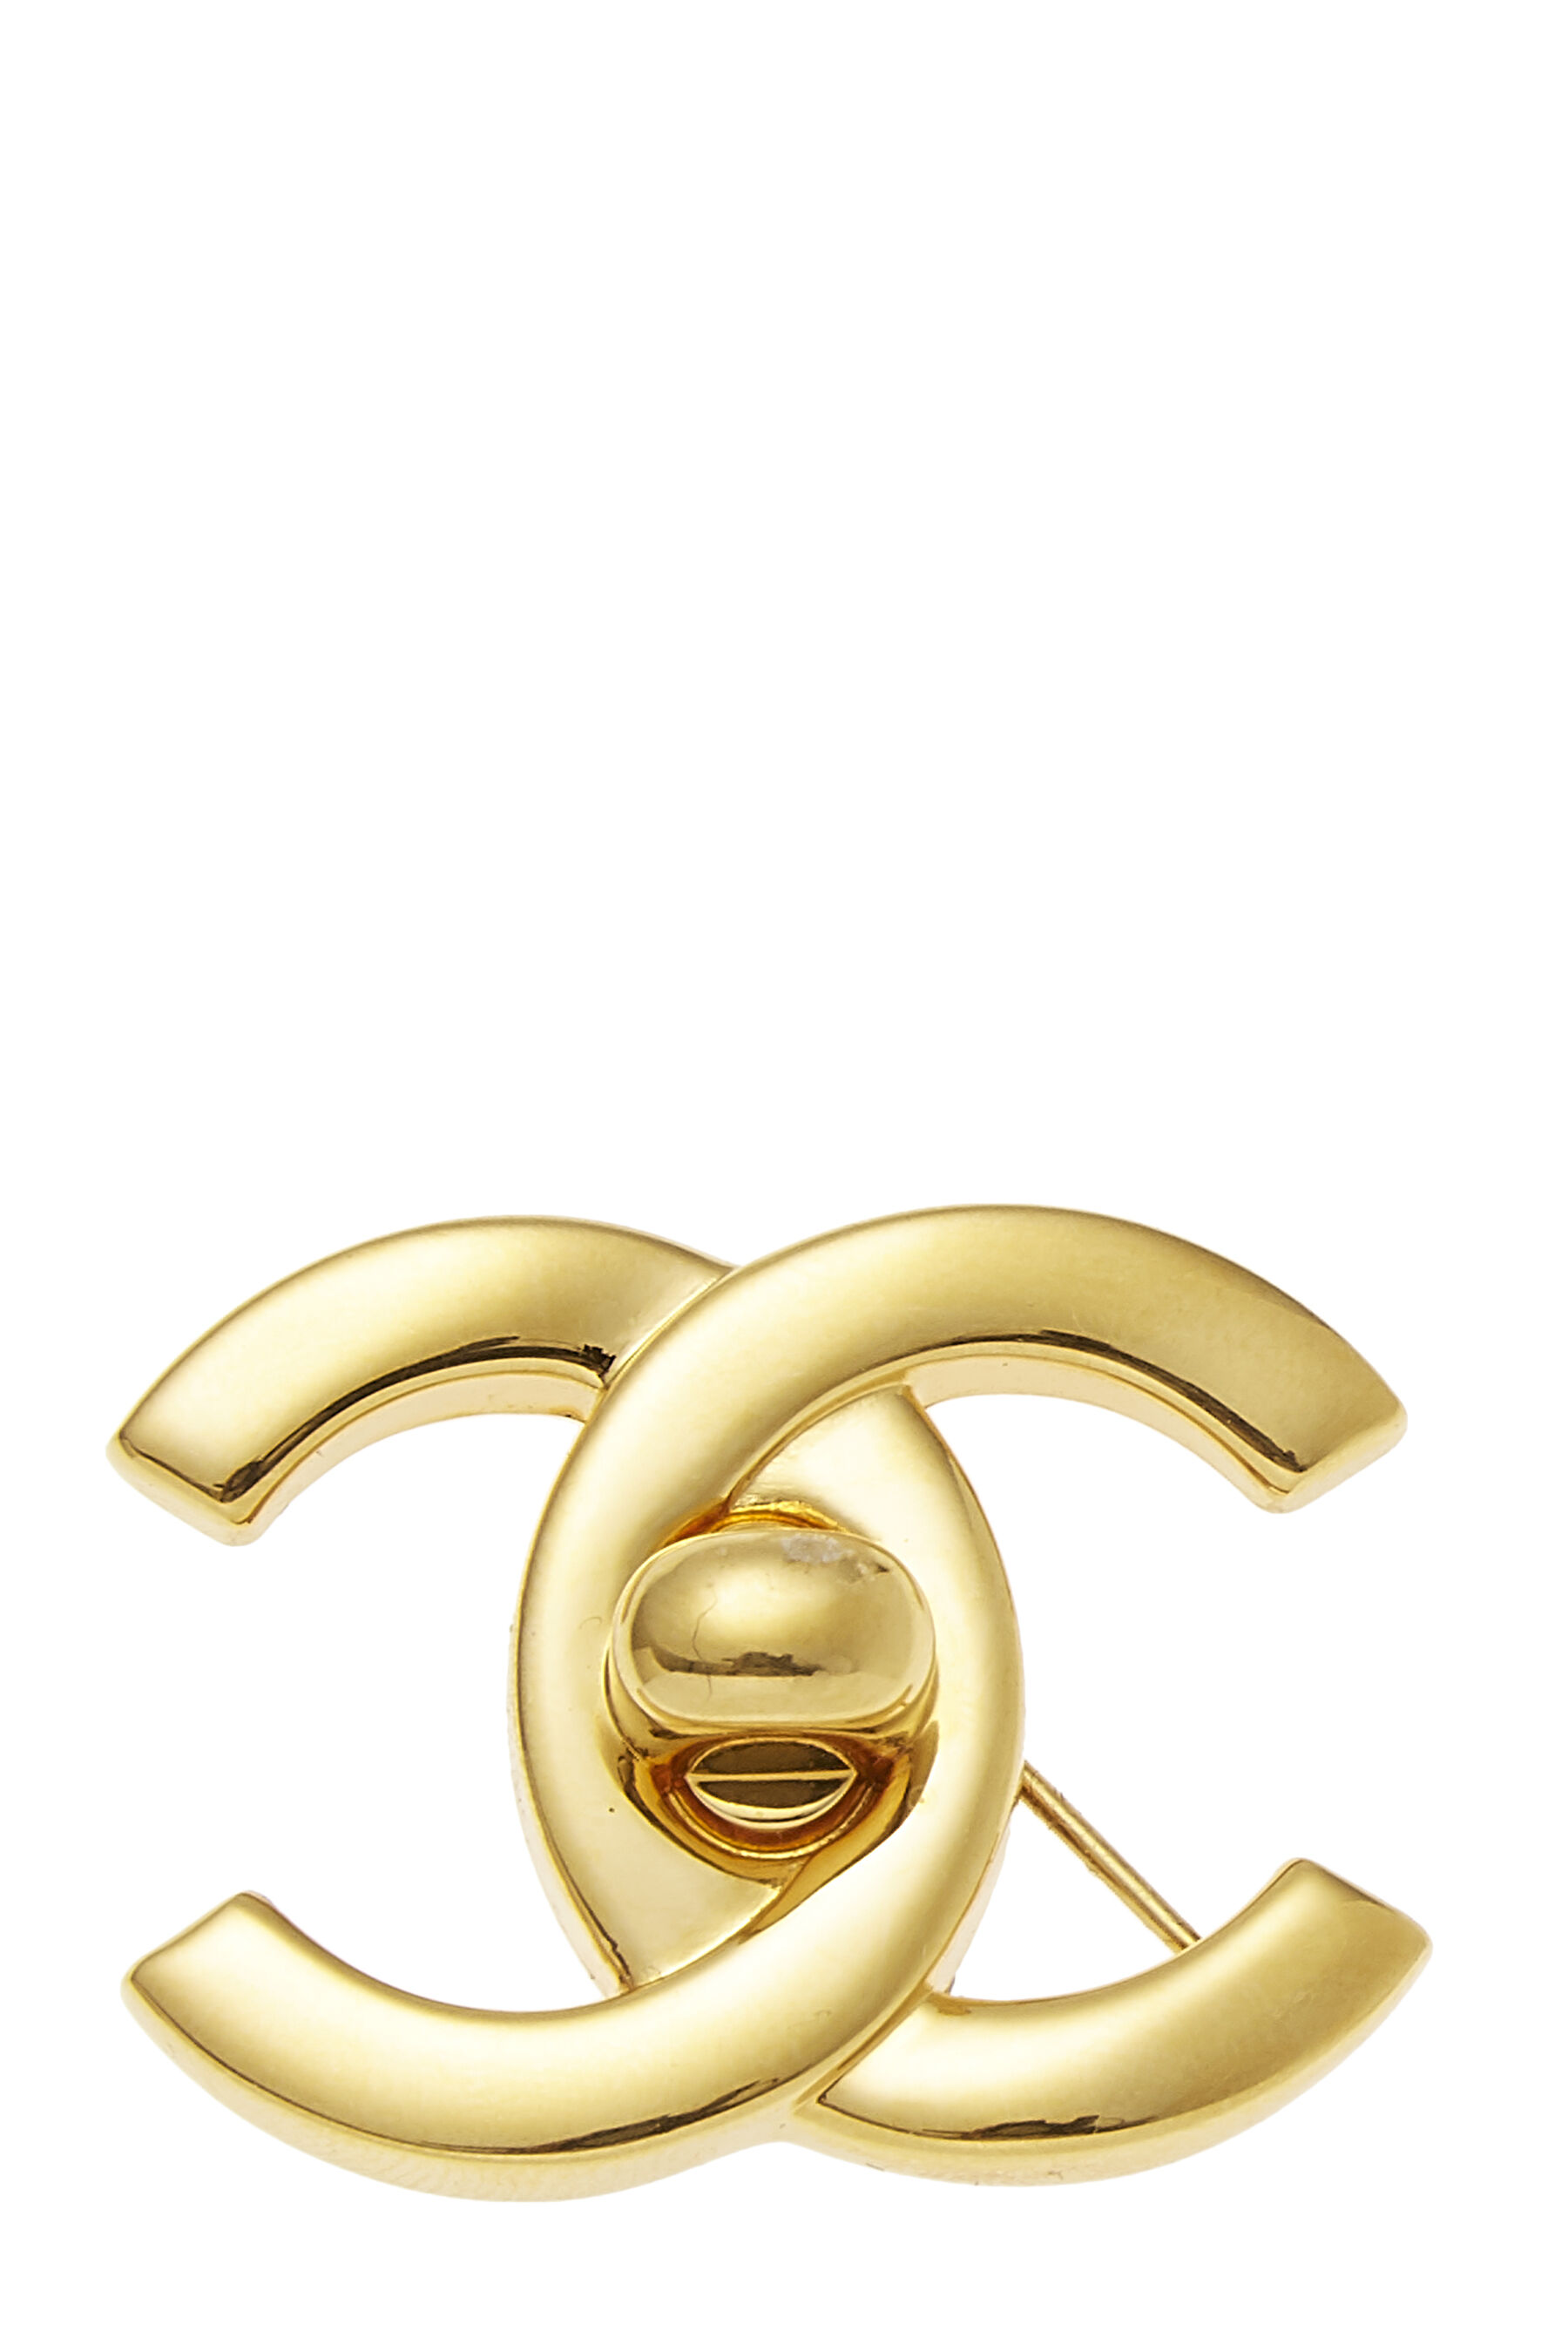 Pre-owned Chanel Gold 'cc' Turnlock Pin Medium